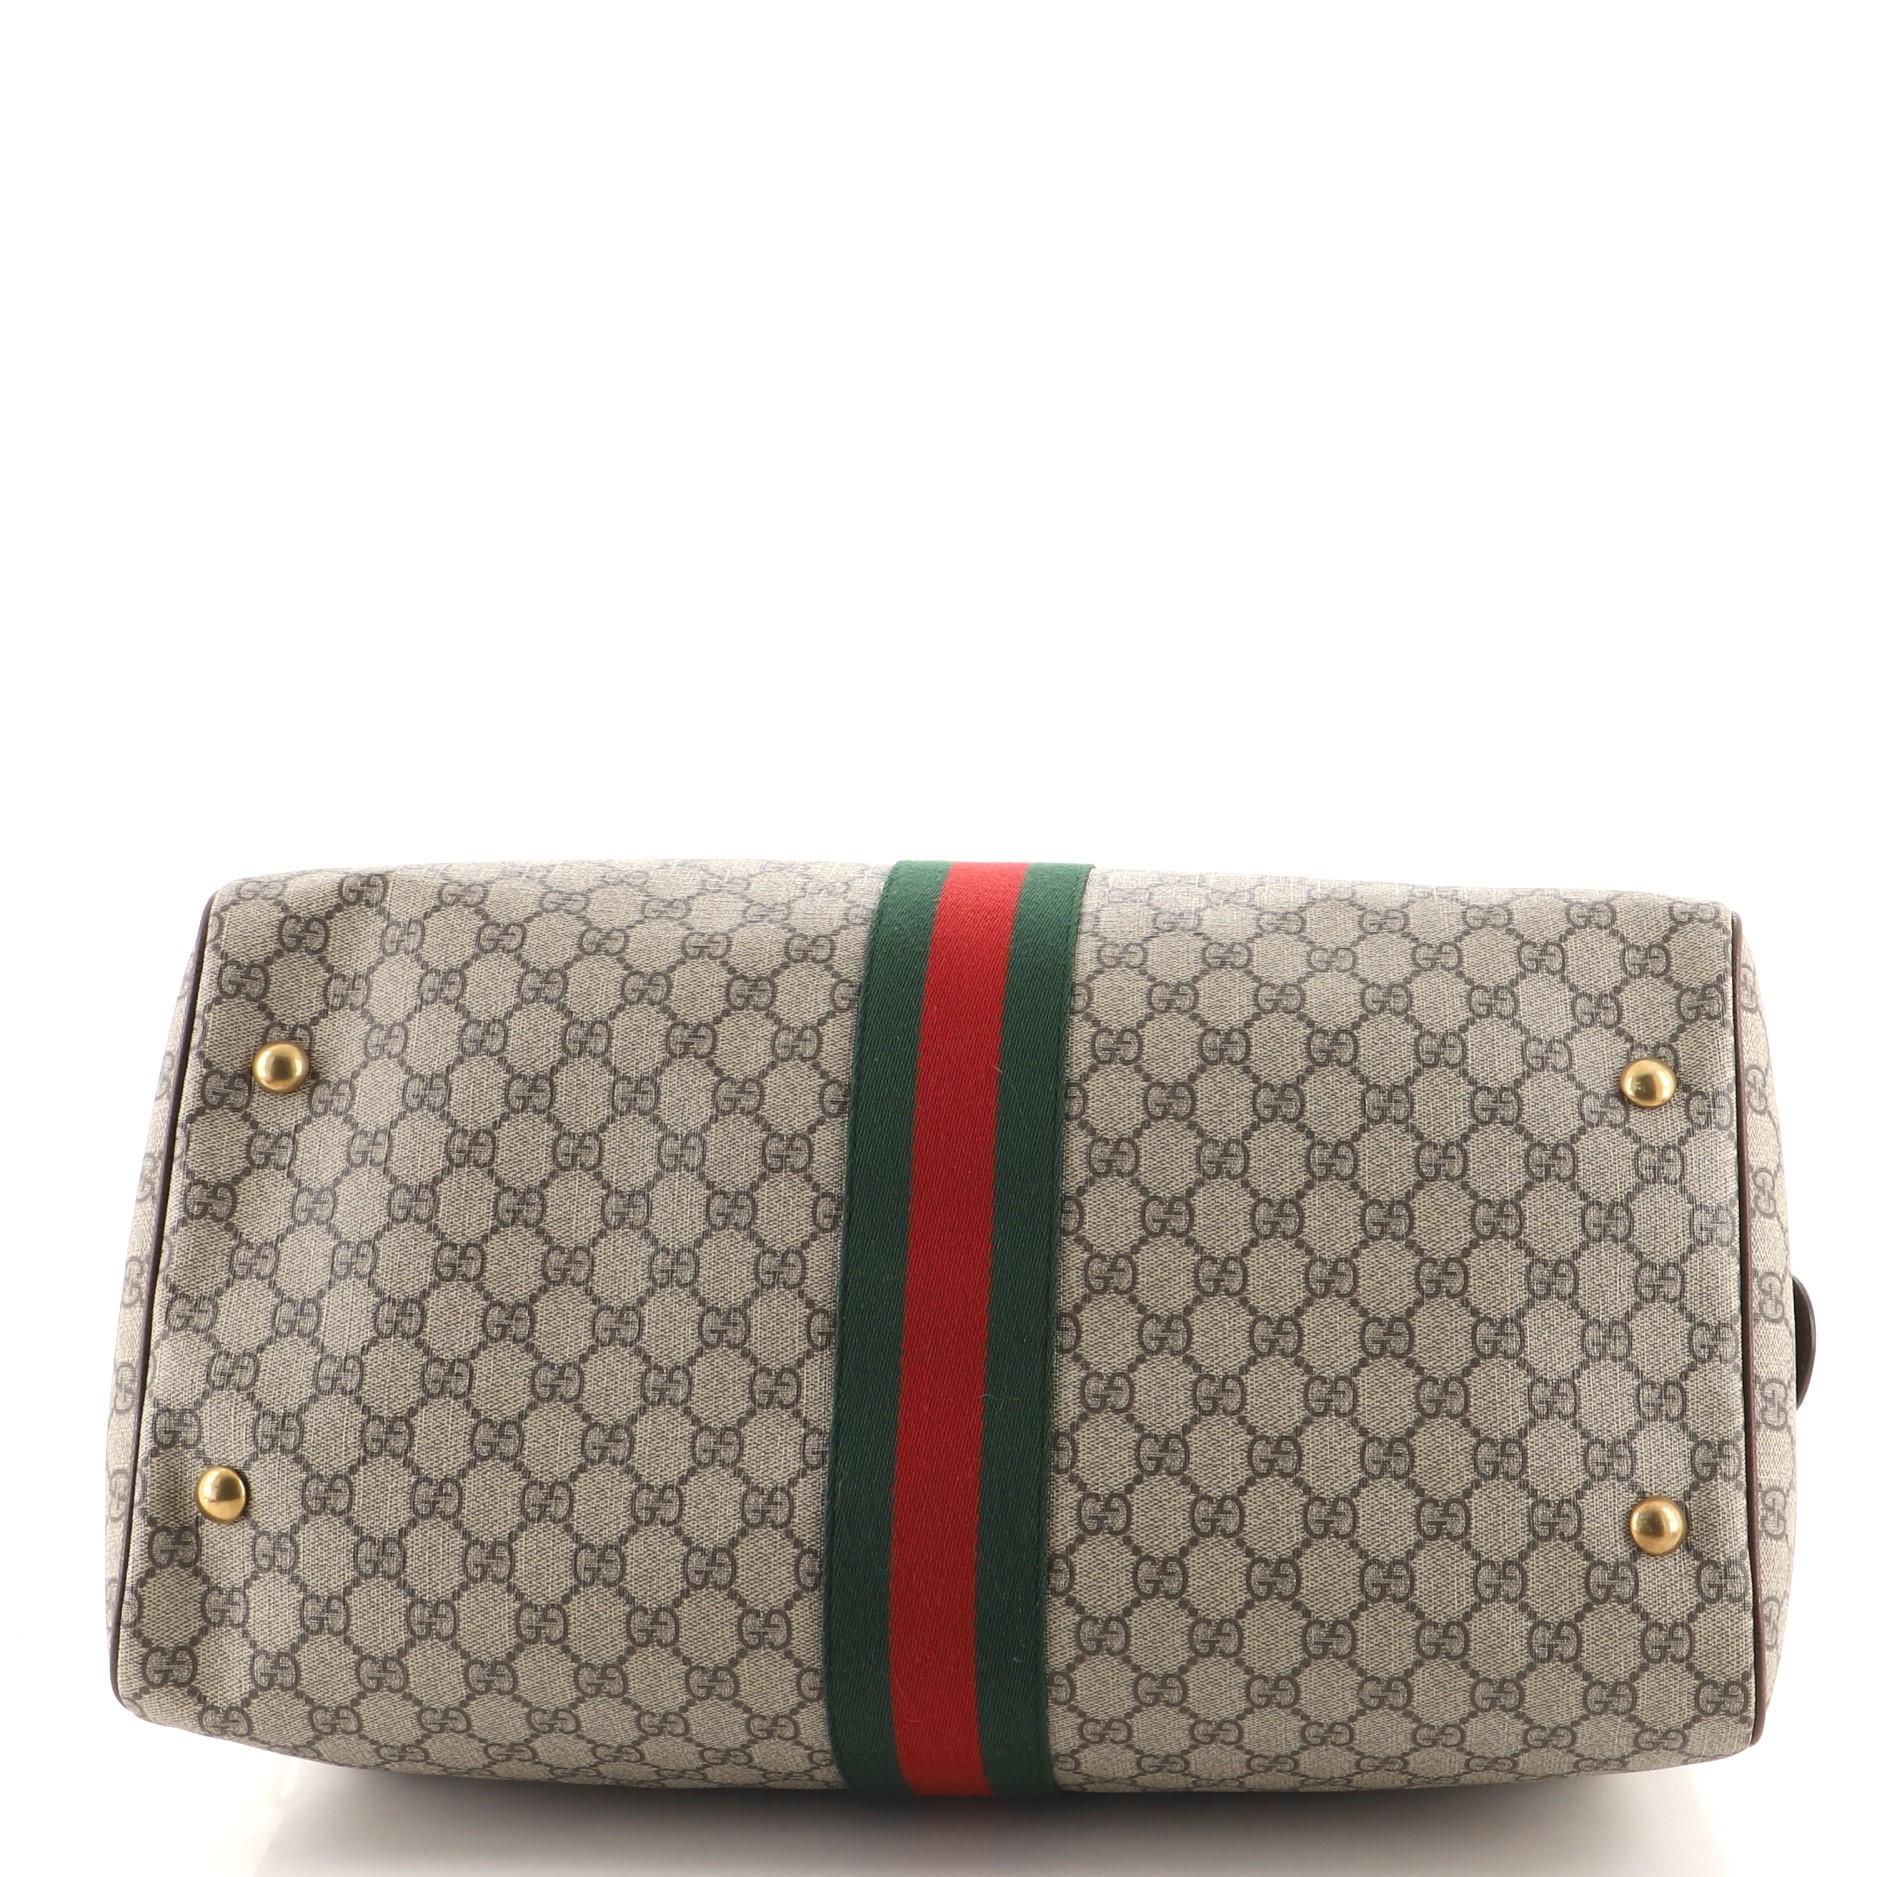 gucci ophidia weekend bag